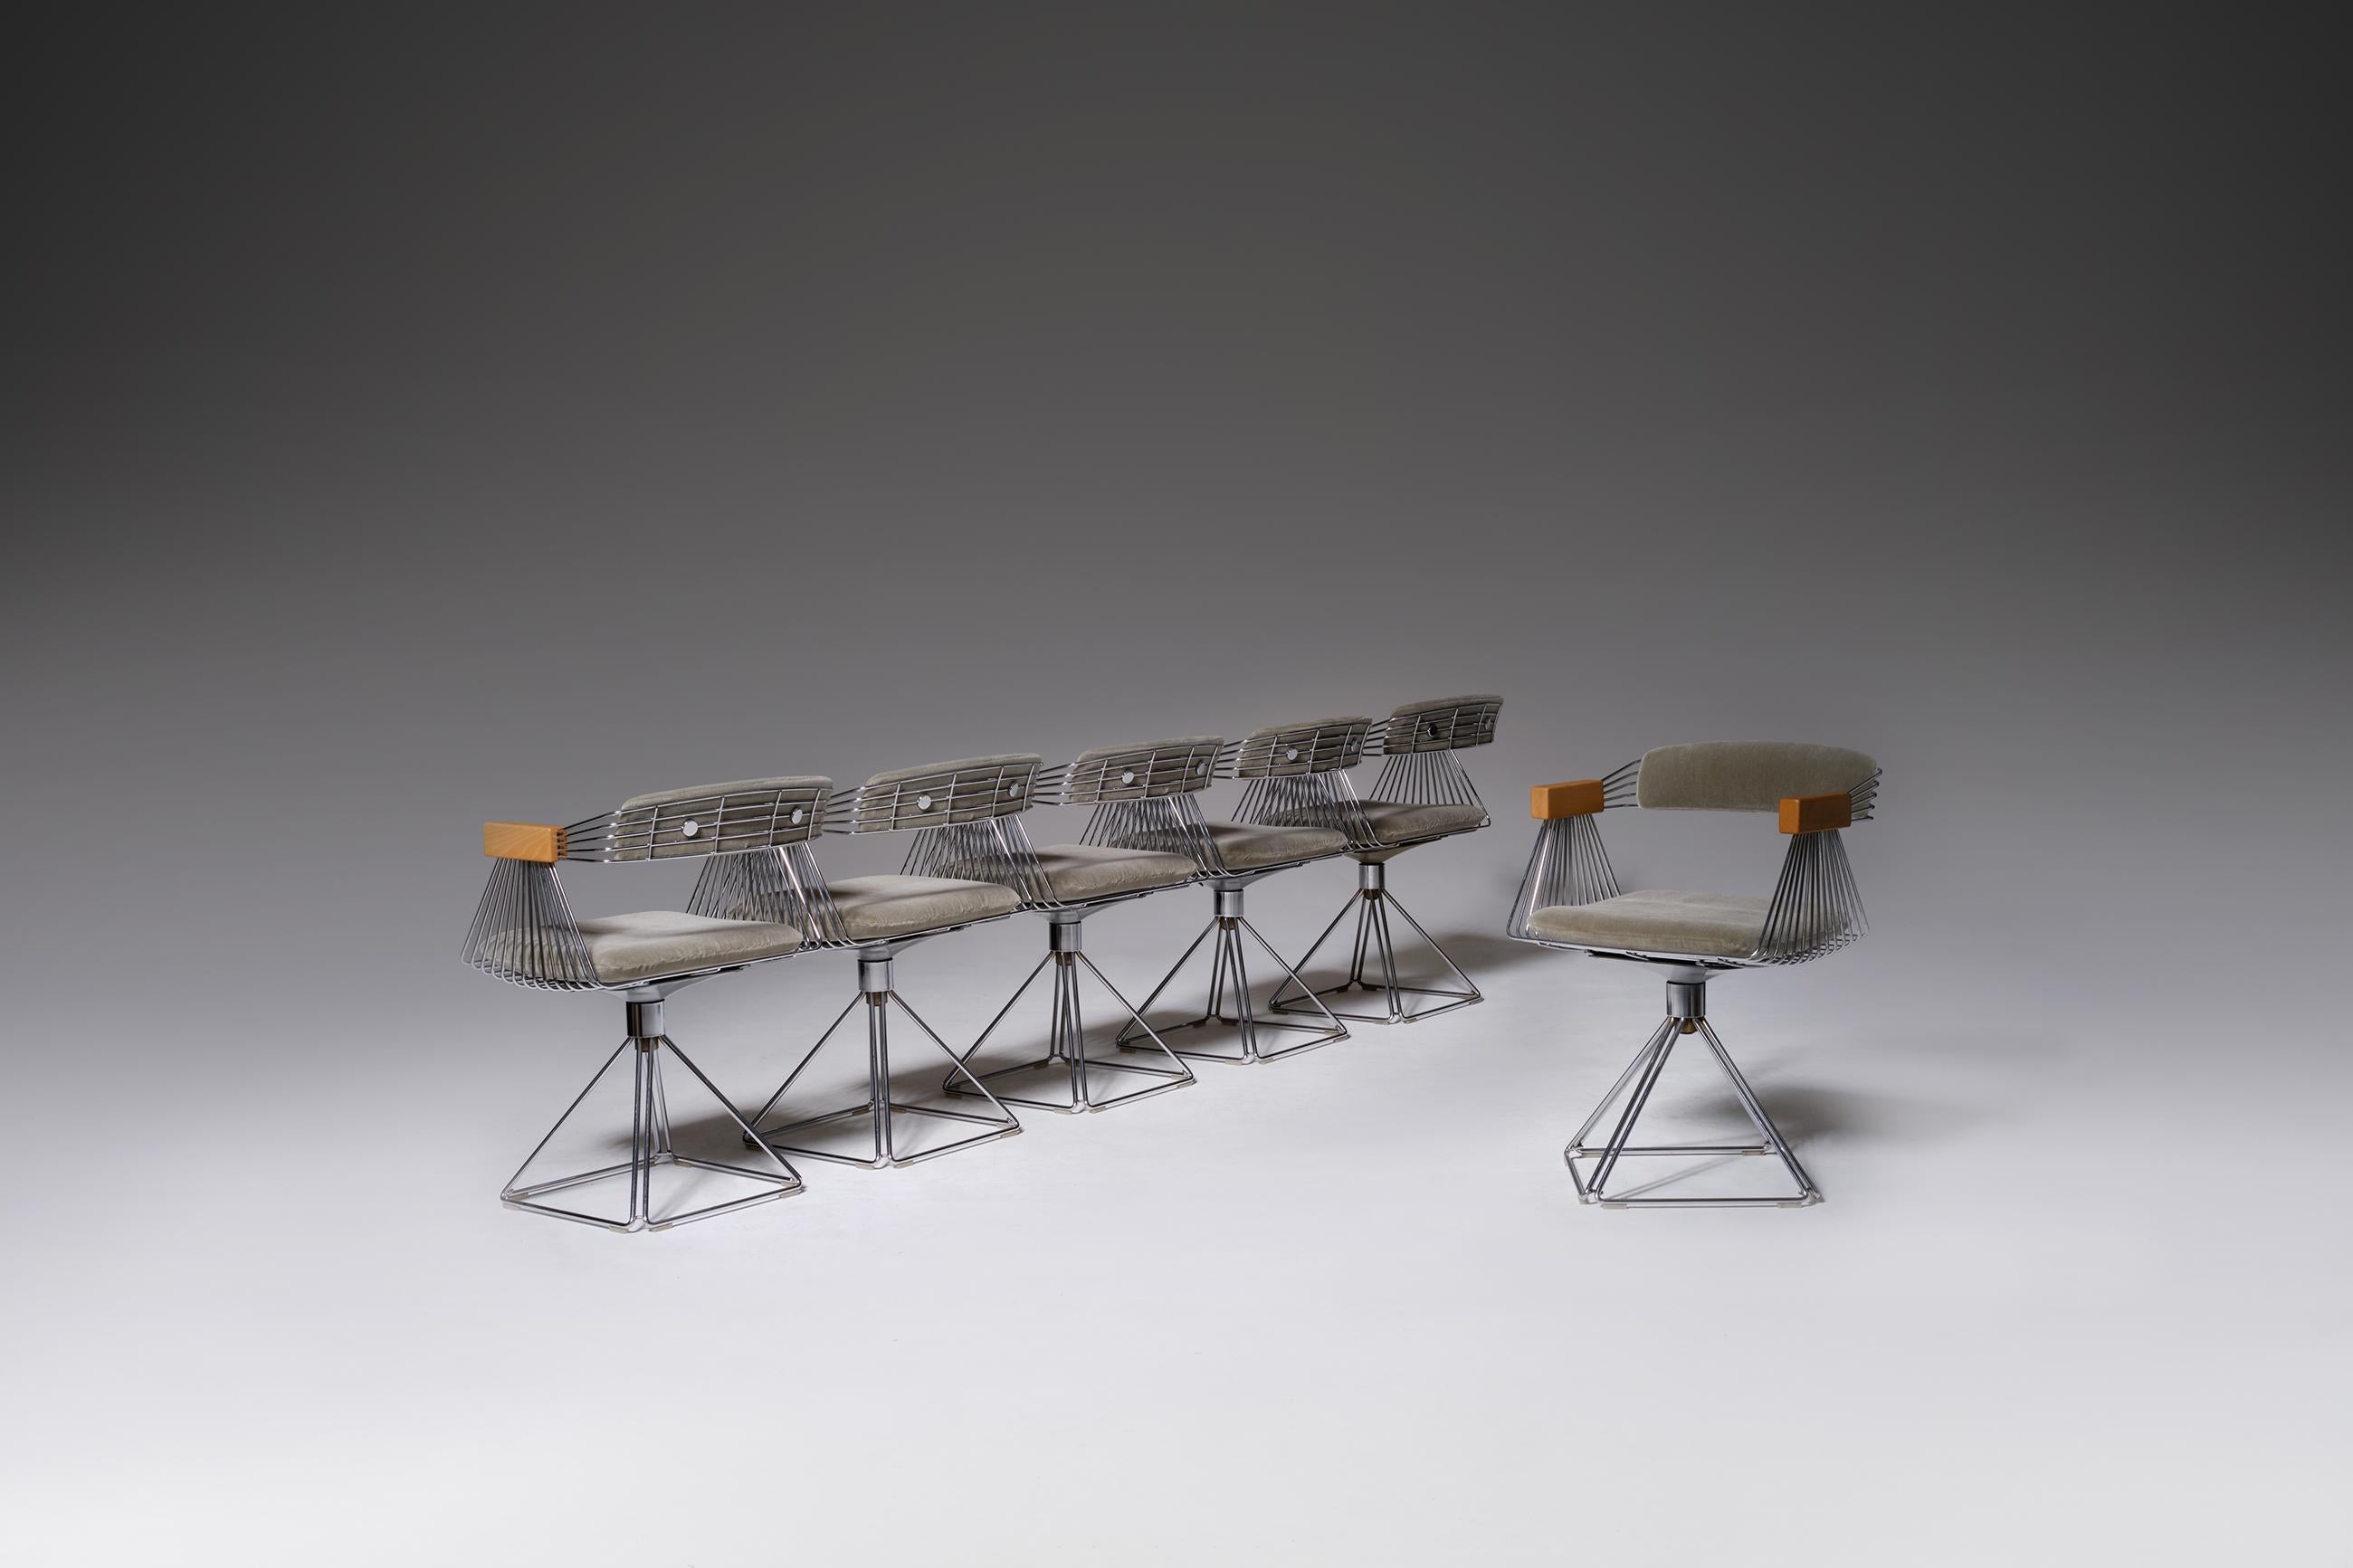 Set of six chrome ‘Delta’ chairs by Rudi Verelst for Novalux, Belgium 1971. Outstanding cubic design on a chromed Pyramid swivel base, re-upholstered in a high quality soft eucalyptus (greyish green) colored mohair and have nice contrasting beech